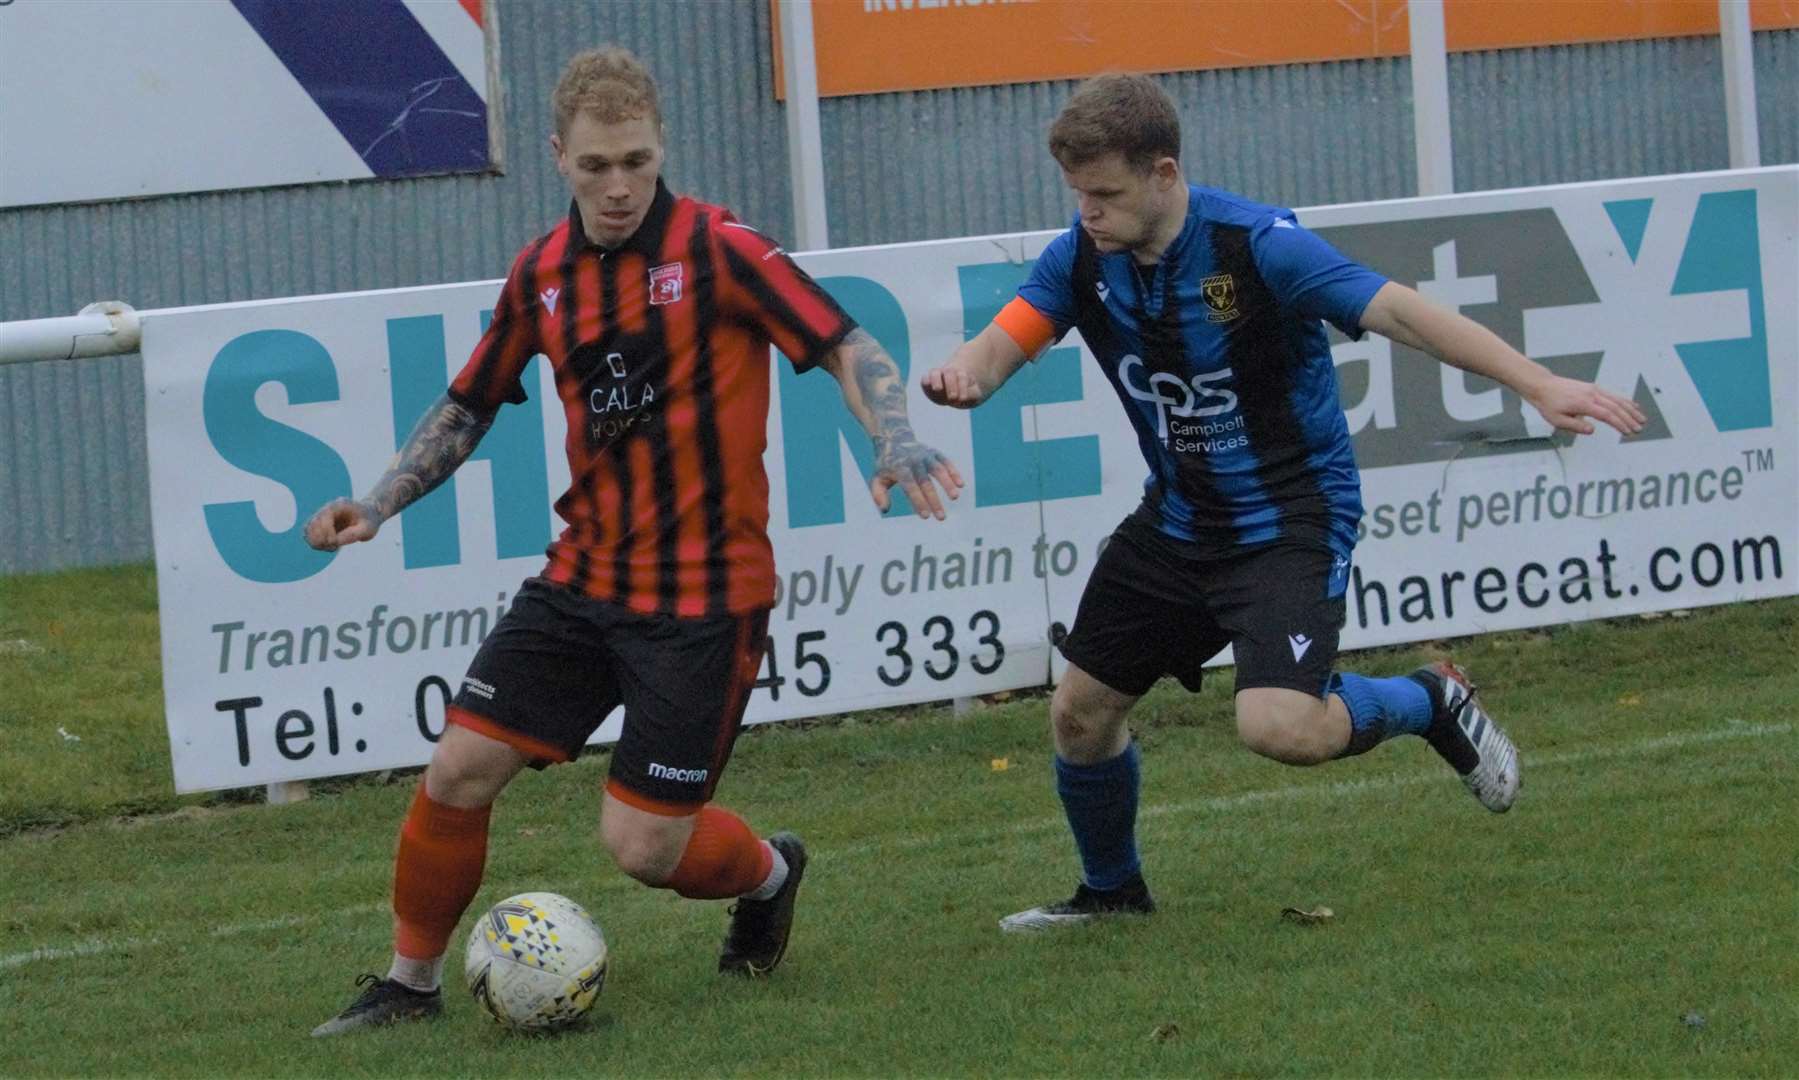 Inverurie and Huntly play for the third time this season. Photo: Derek Lowe